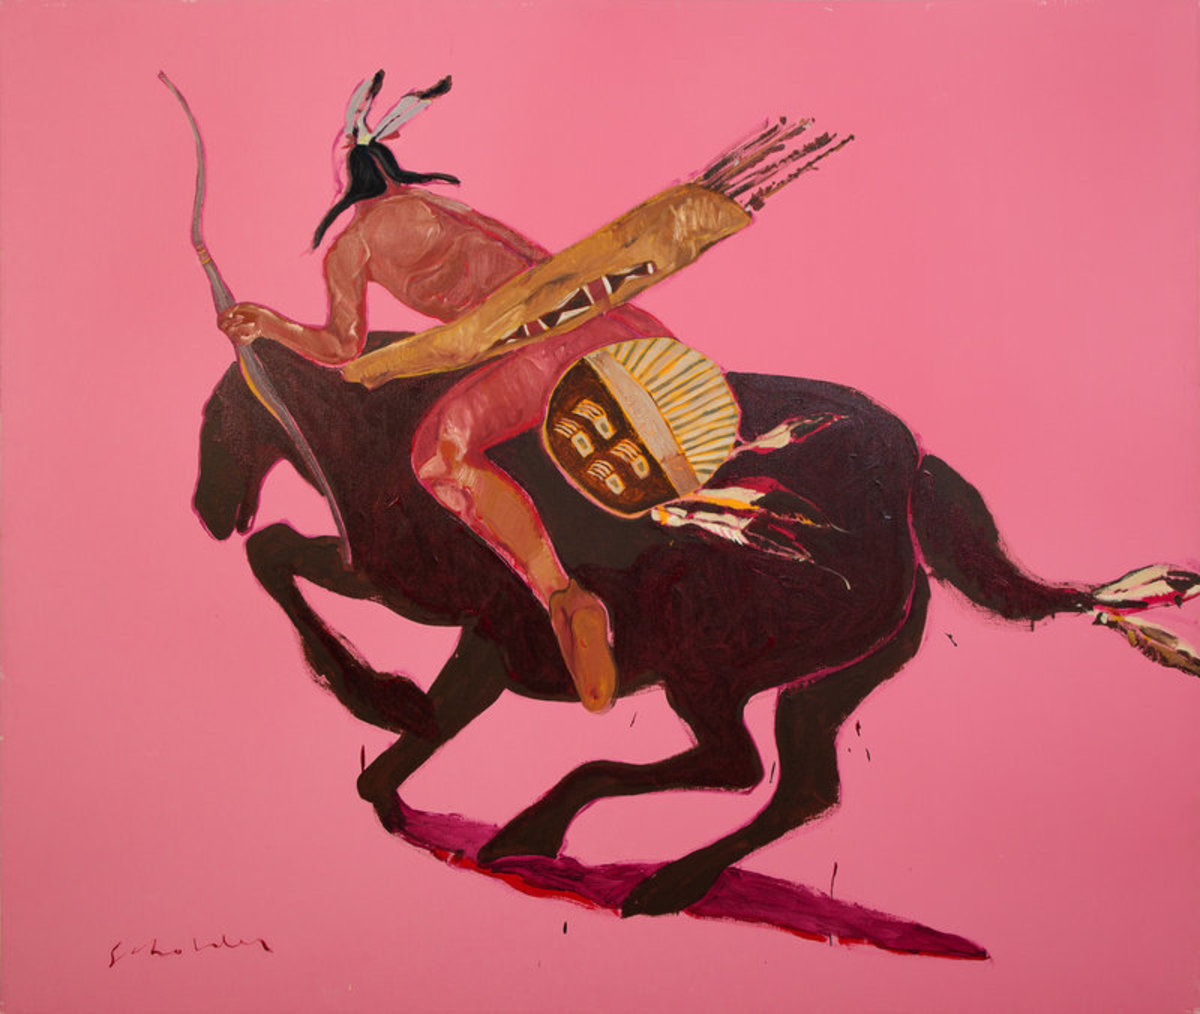 "Hollywood Indian and Horse #2" by Fritz Scholder, 1973, set a new auction record after selling for $500,000.